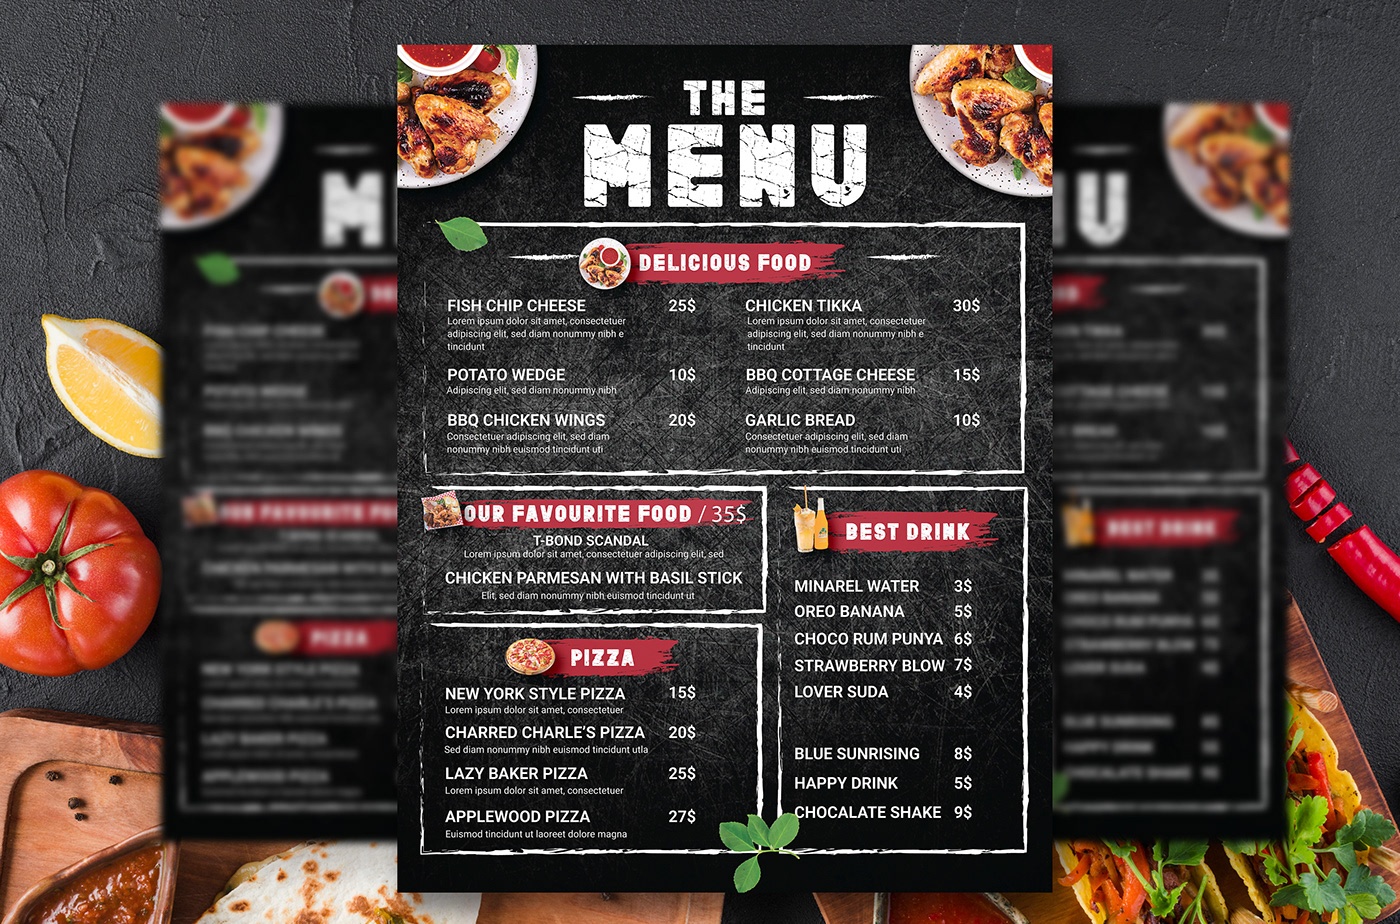 This is a Food Menu Flyer Design.